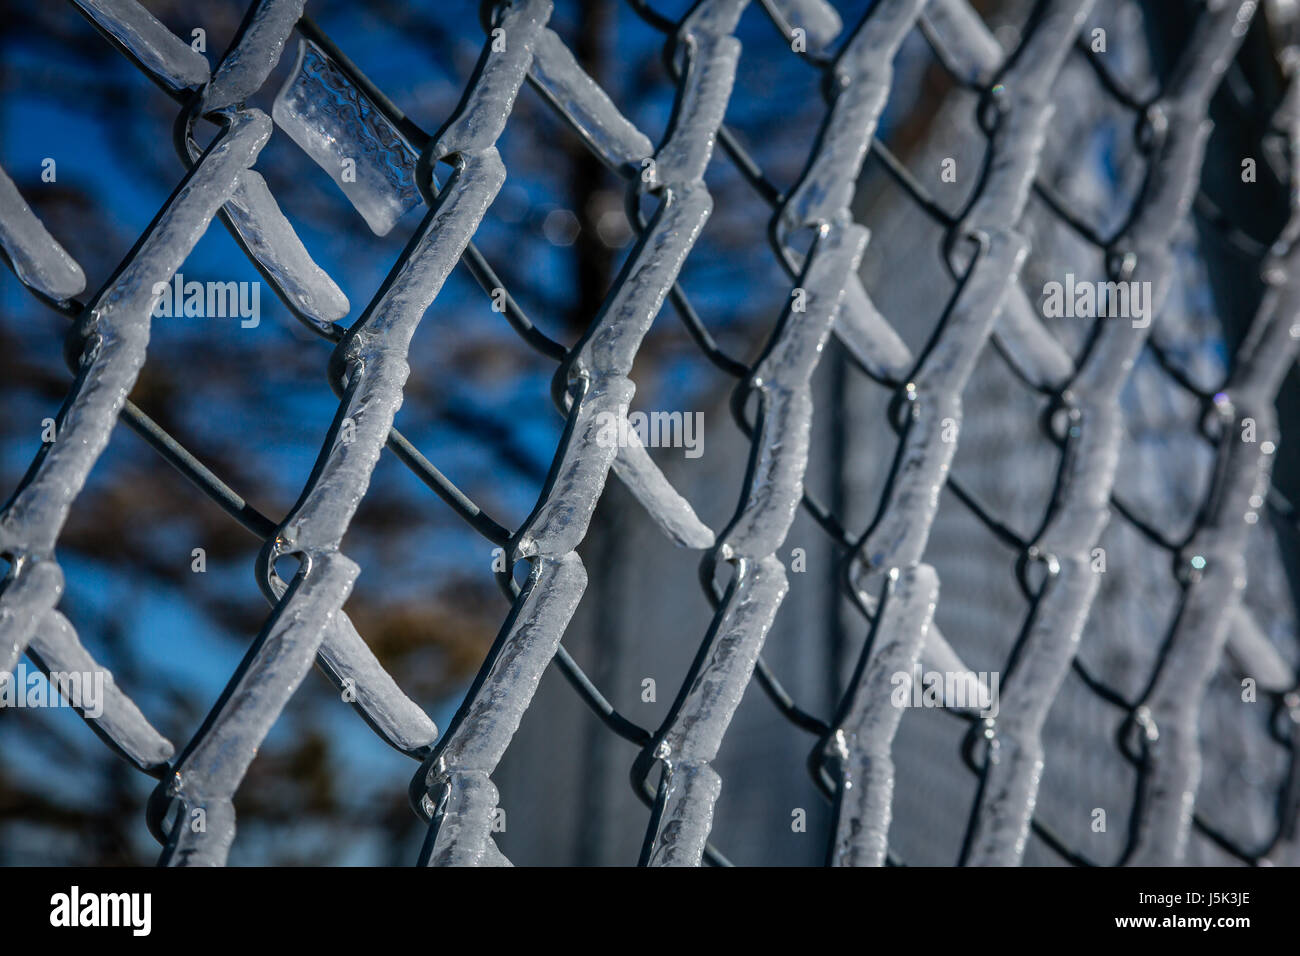 Ice on a chain link fence creates a wintry barrier. Stock Photo